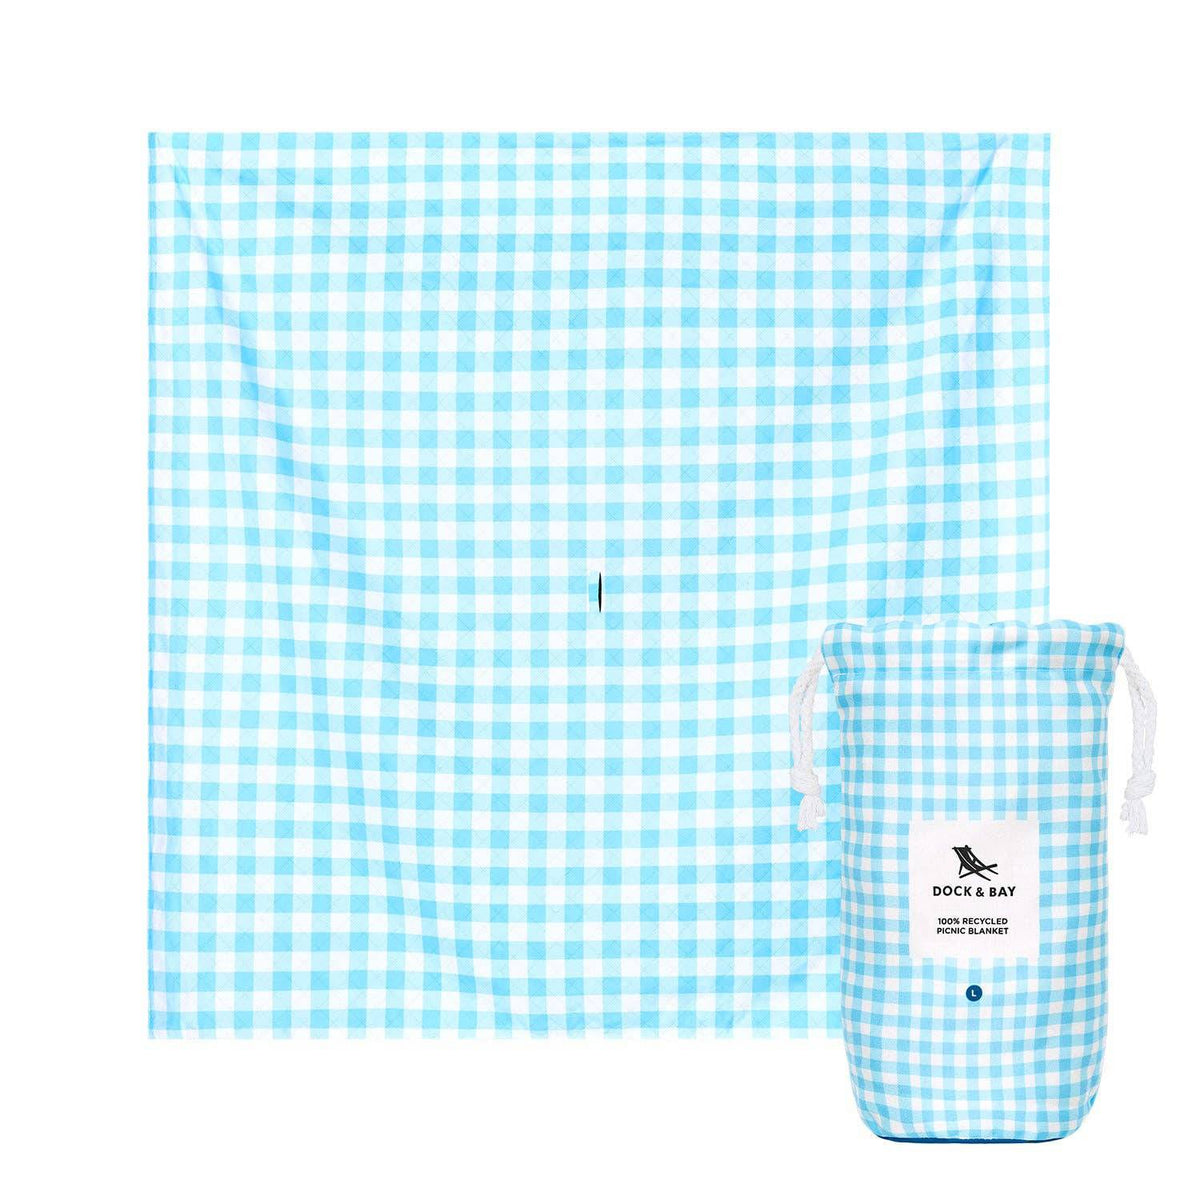 Picnic blanket - Quick dry, large size and compact - The Preppy Bunny